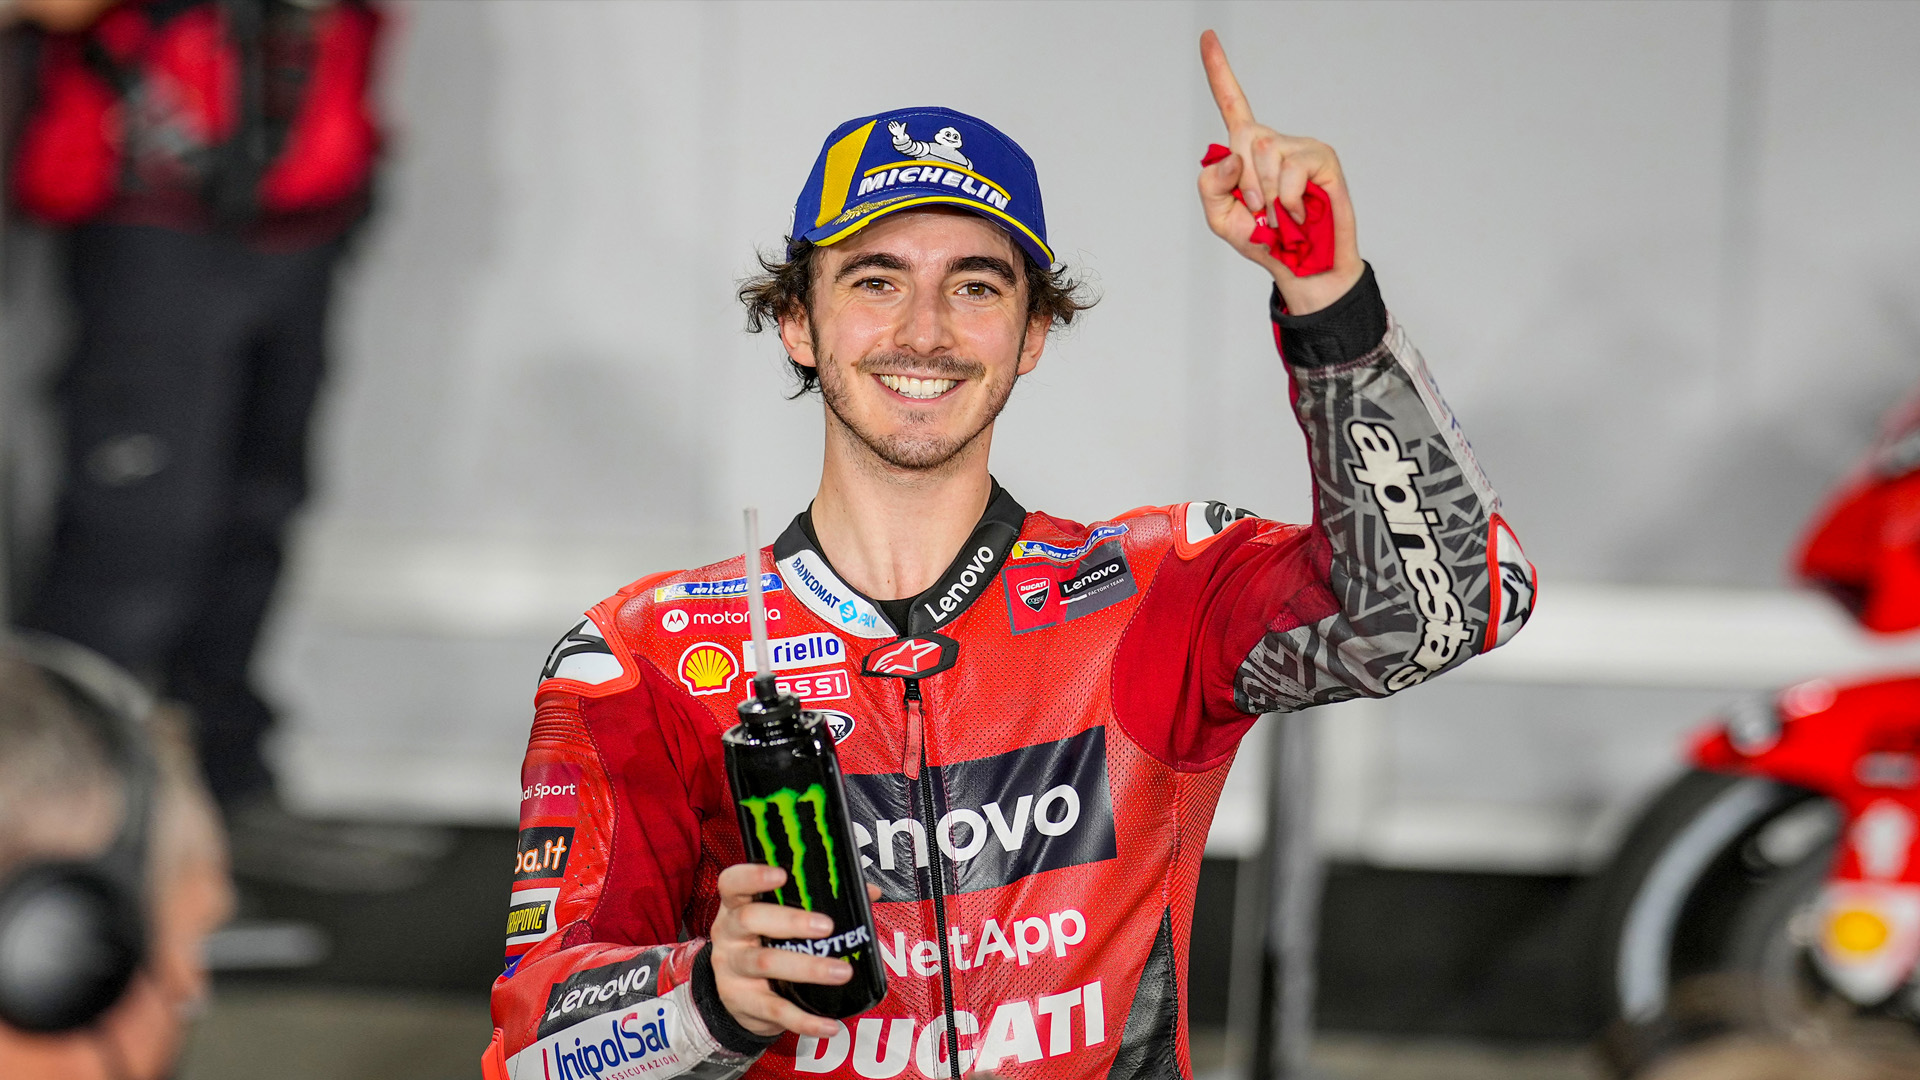 Qatar GP. Stunning pole position and new all-time lap record for Pecco ...